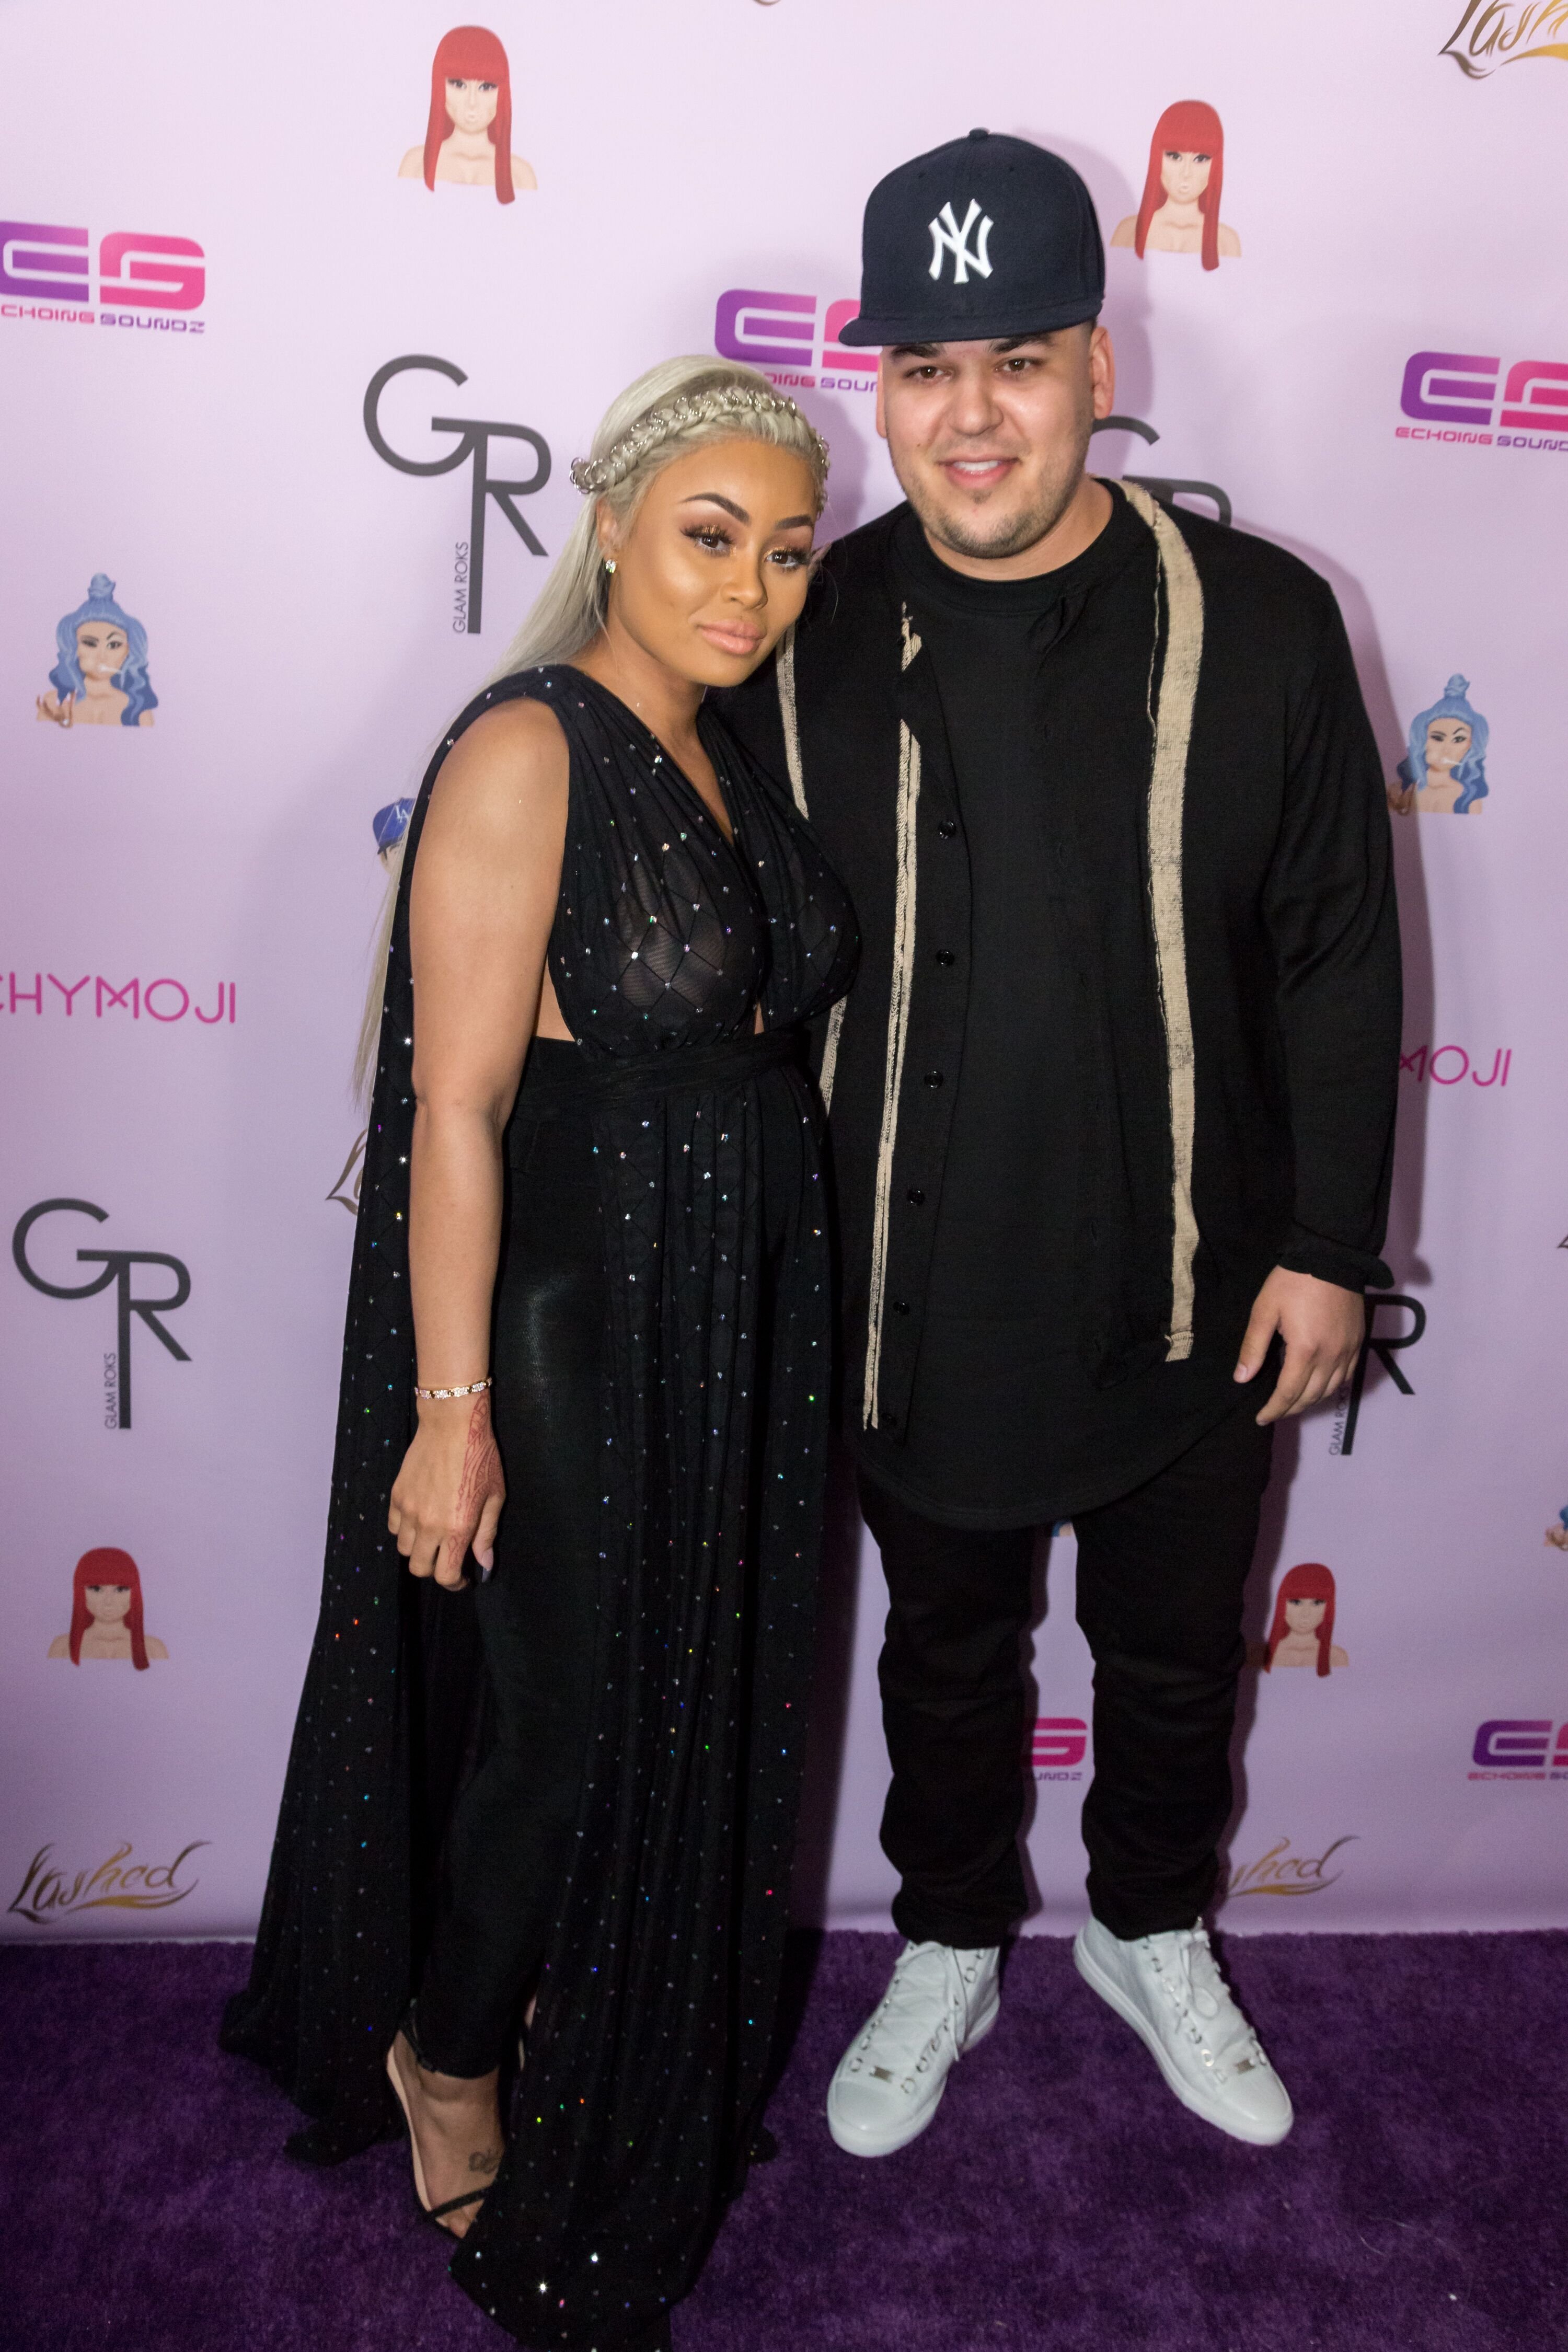 Blac Chyna and Rob Kardashian a the unveiling of her 'Chymoji' Emoji in May 2016/ Source: Getty Images